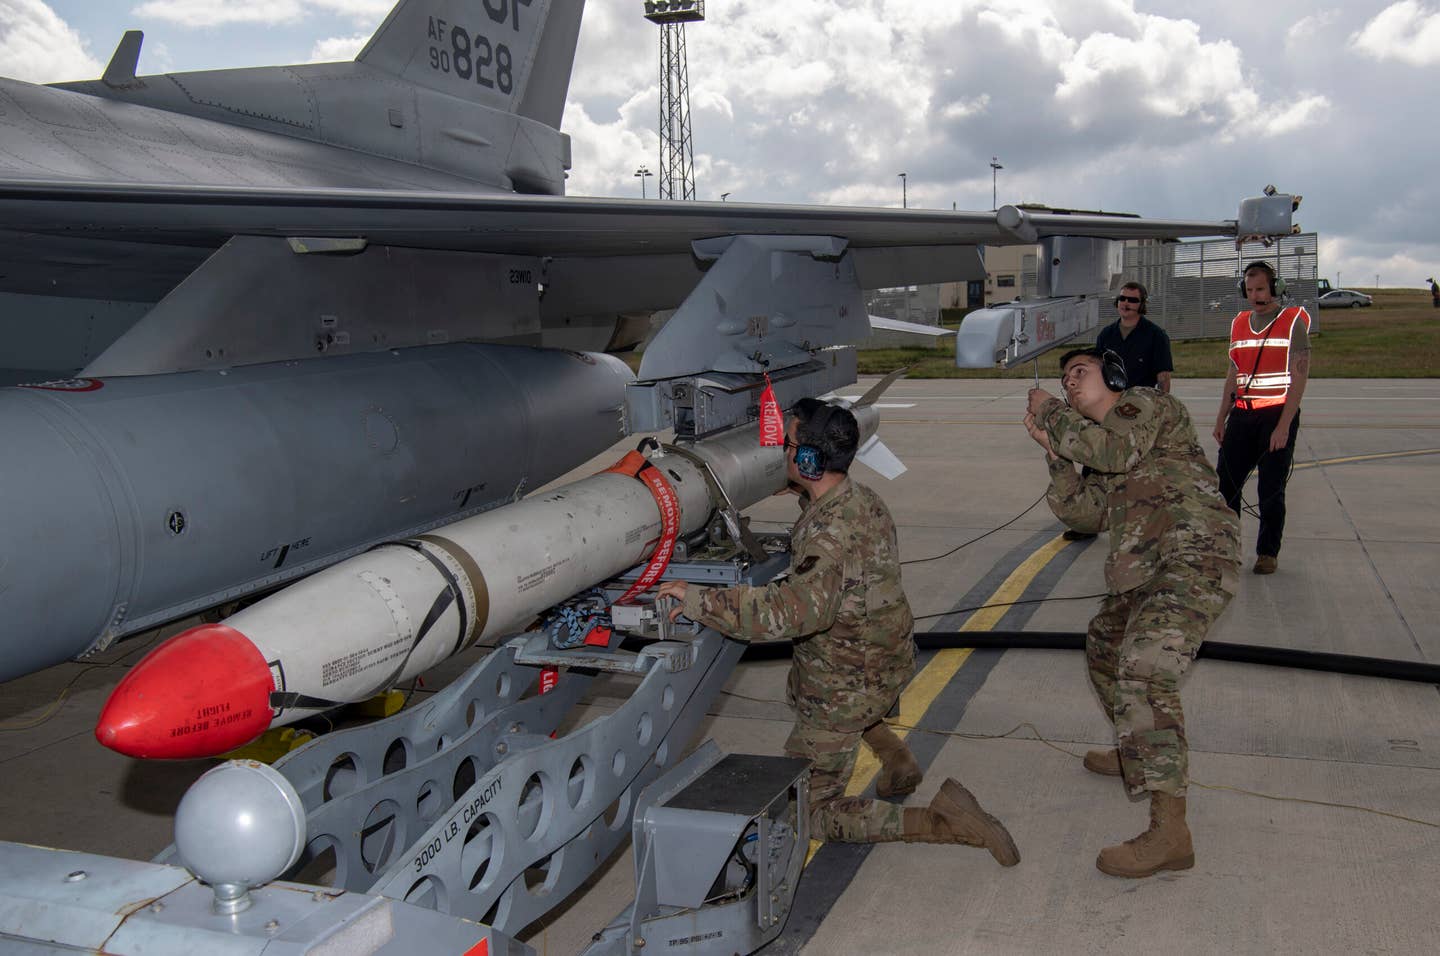 A U.S. Air Force weapons load crew chief loads an inert AGM-88 High-speed Anti-Radiation Missile, or HARM, onto an F-16 Fighting Falcon, at Spangdahlem Air Base, Germany. <em>U.S. Air Force photo by Senior Airman Kyle Cope</em>